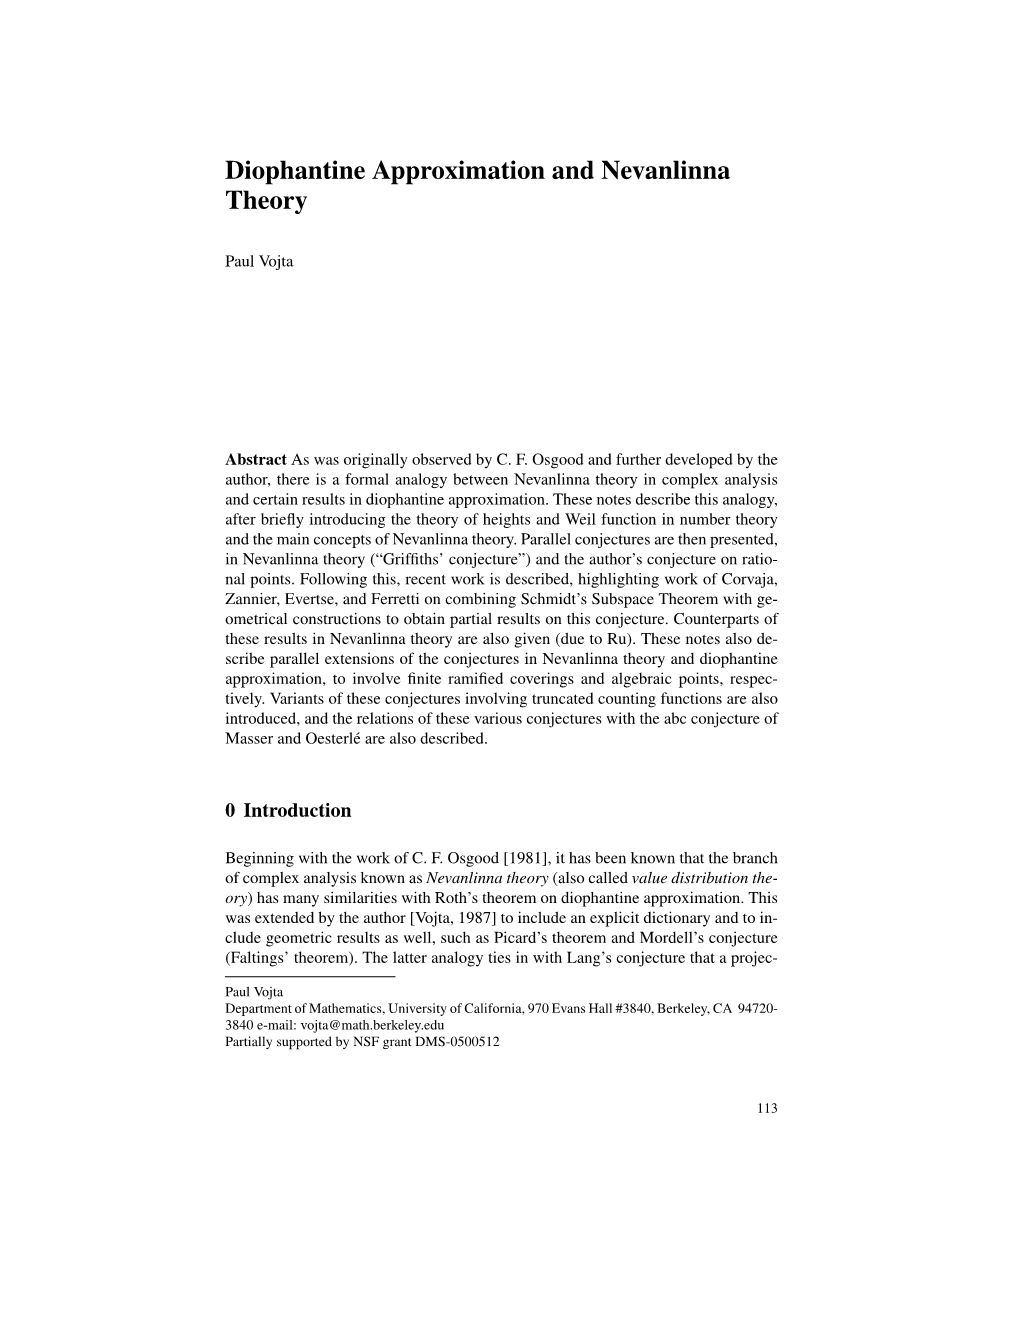 Diophantine Approximation and Nevanlinna Theory